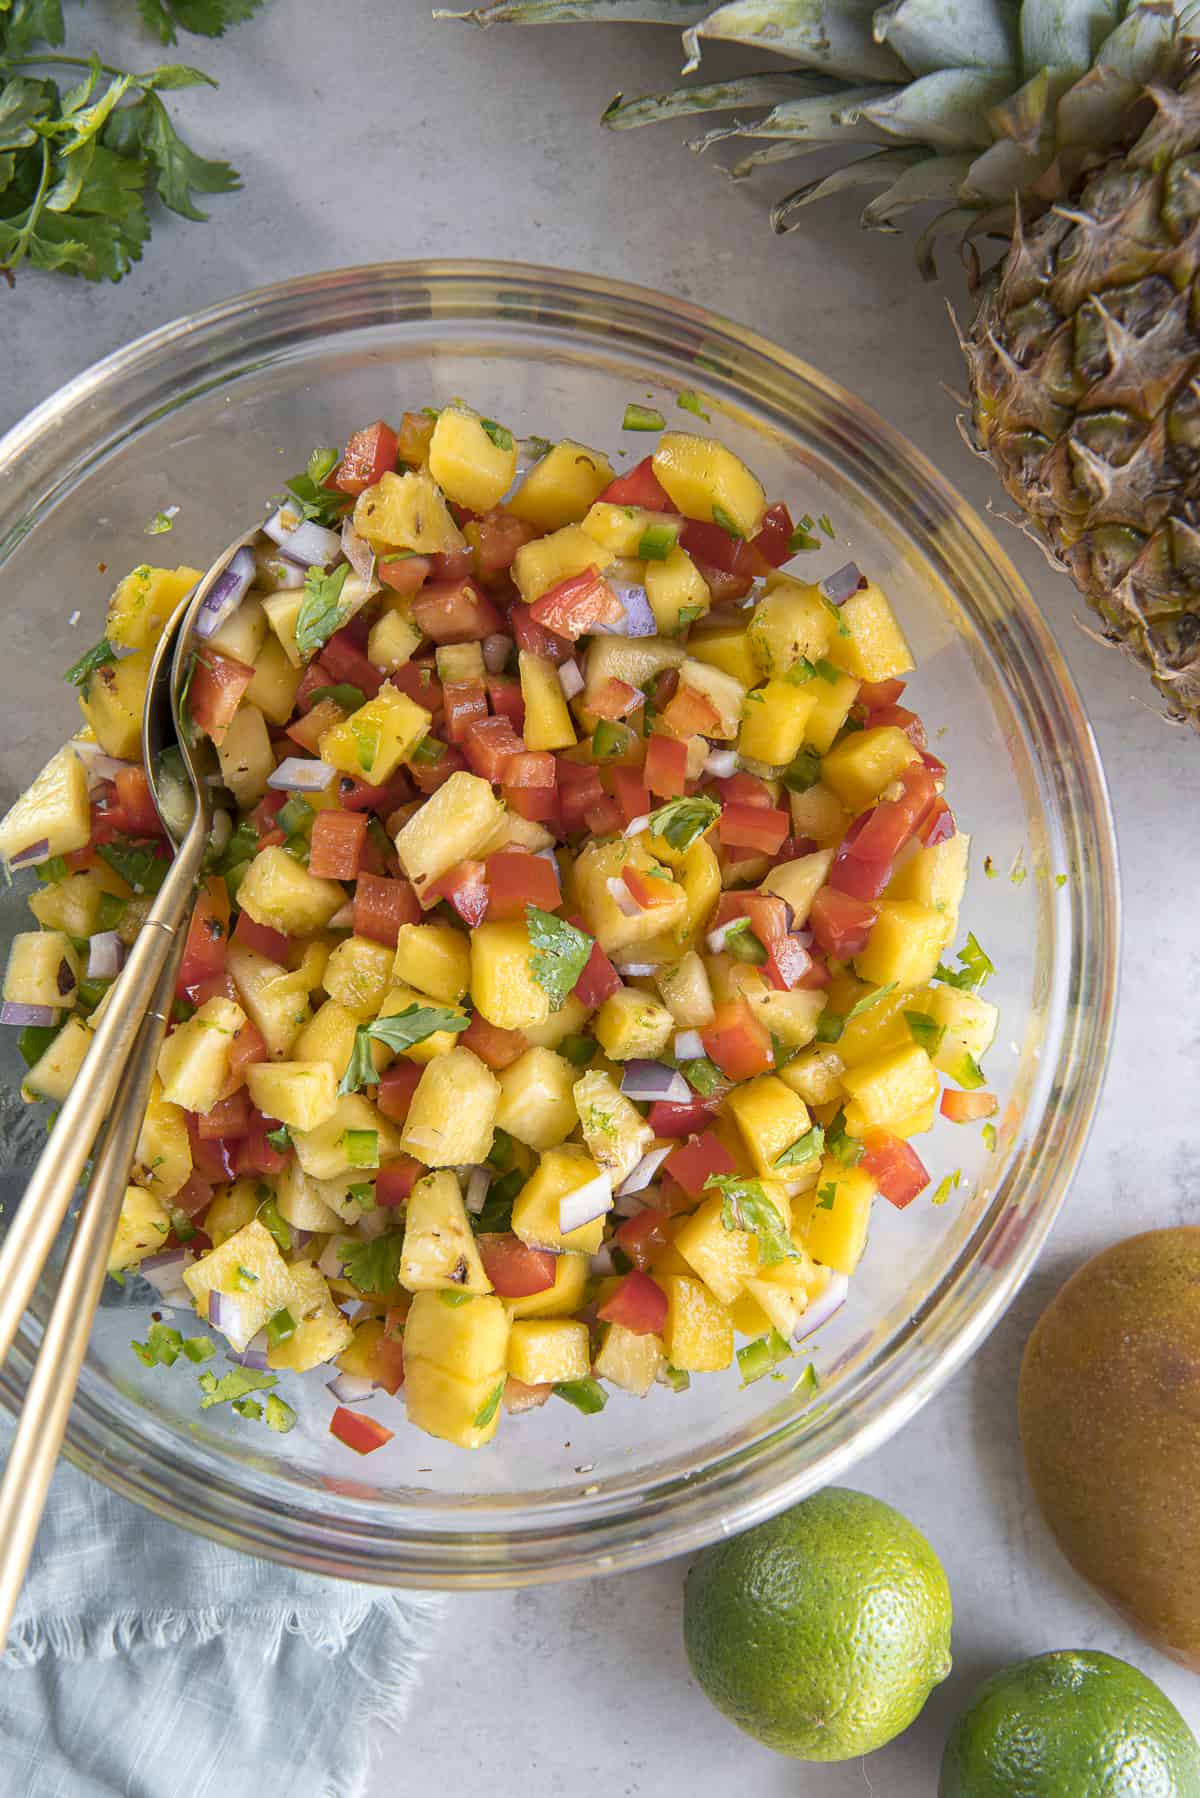 the ingredients for pineapple mango salsa tossed together in a glass mixing bowl with gold utensils, surrounded by limes, cilantro, mango, a pineapple, and a blue napkin